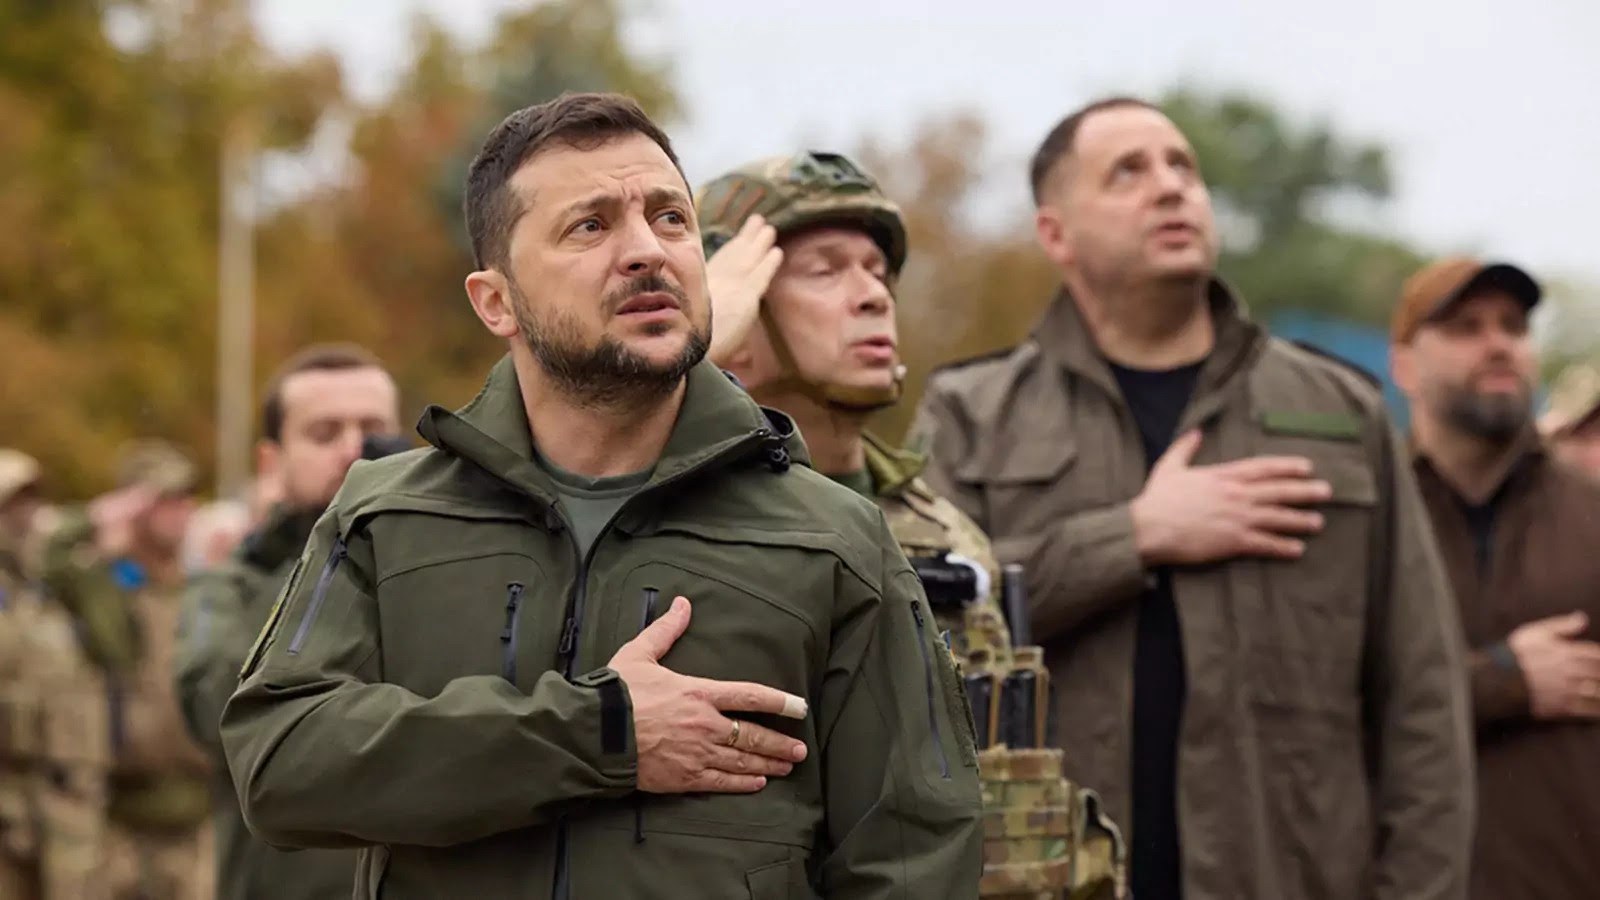 Ukraine’s President Volodymyr Zelensky sings a national anthem on September 14, 2022 during a flag raising ceremony in the recently liberated town of Izium in the Kharkiv region.